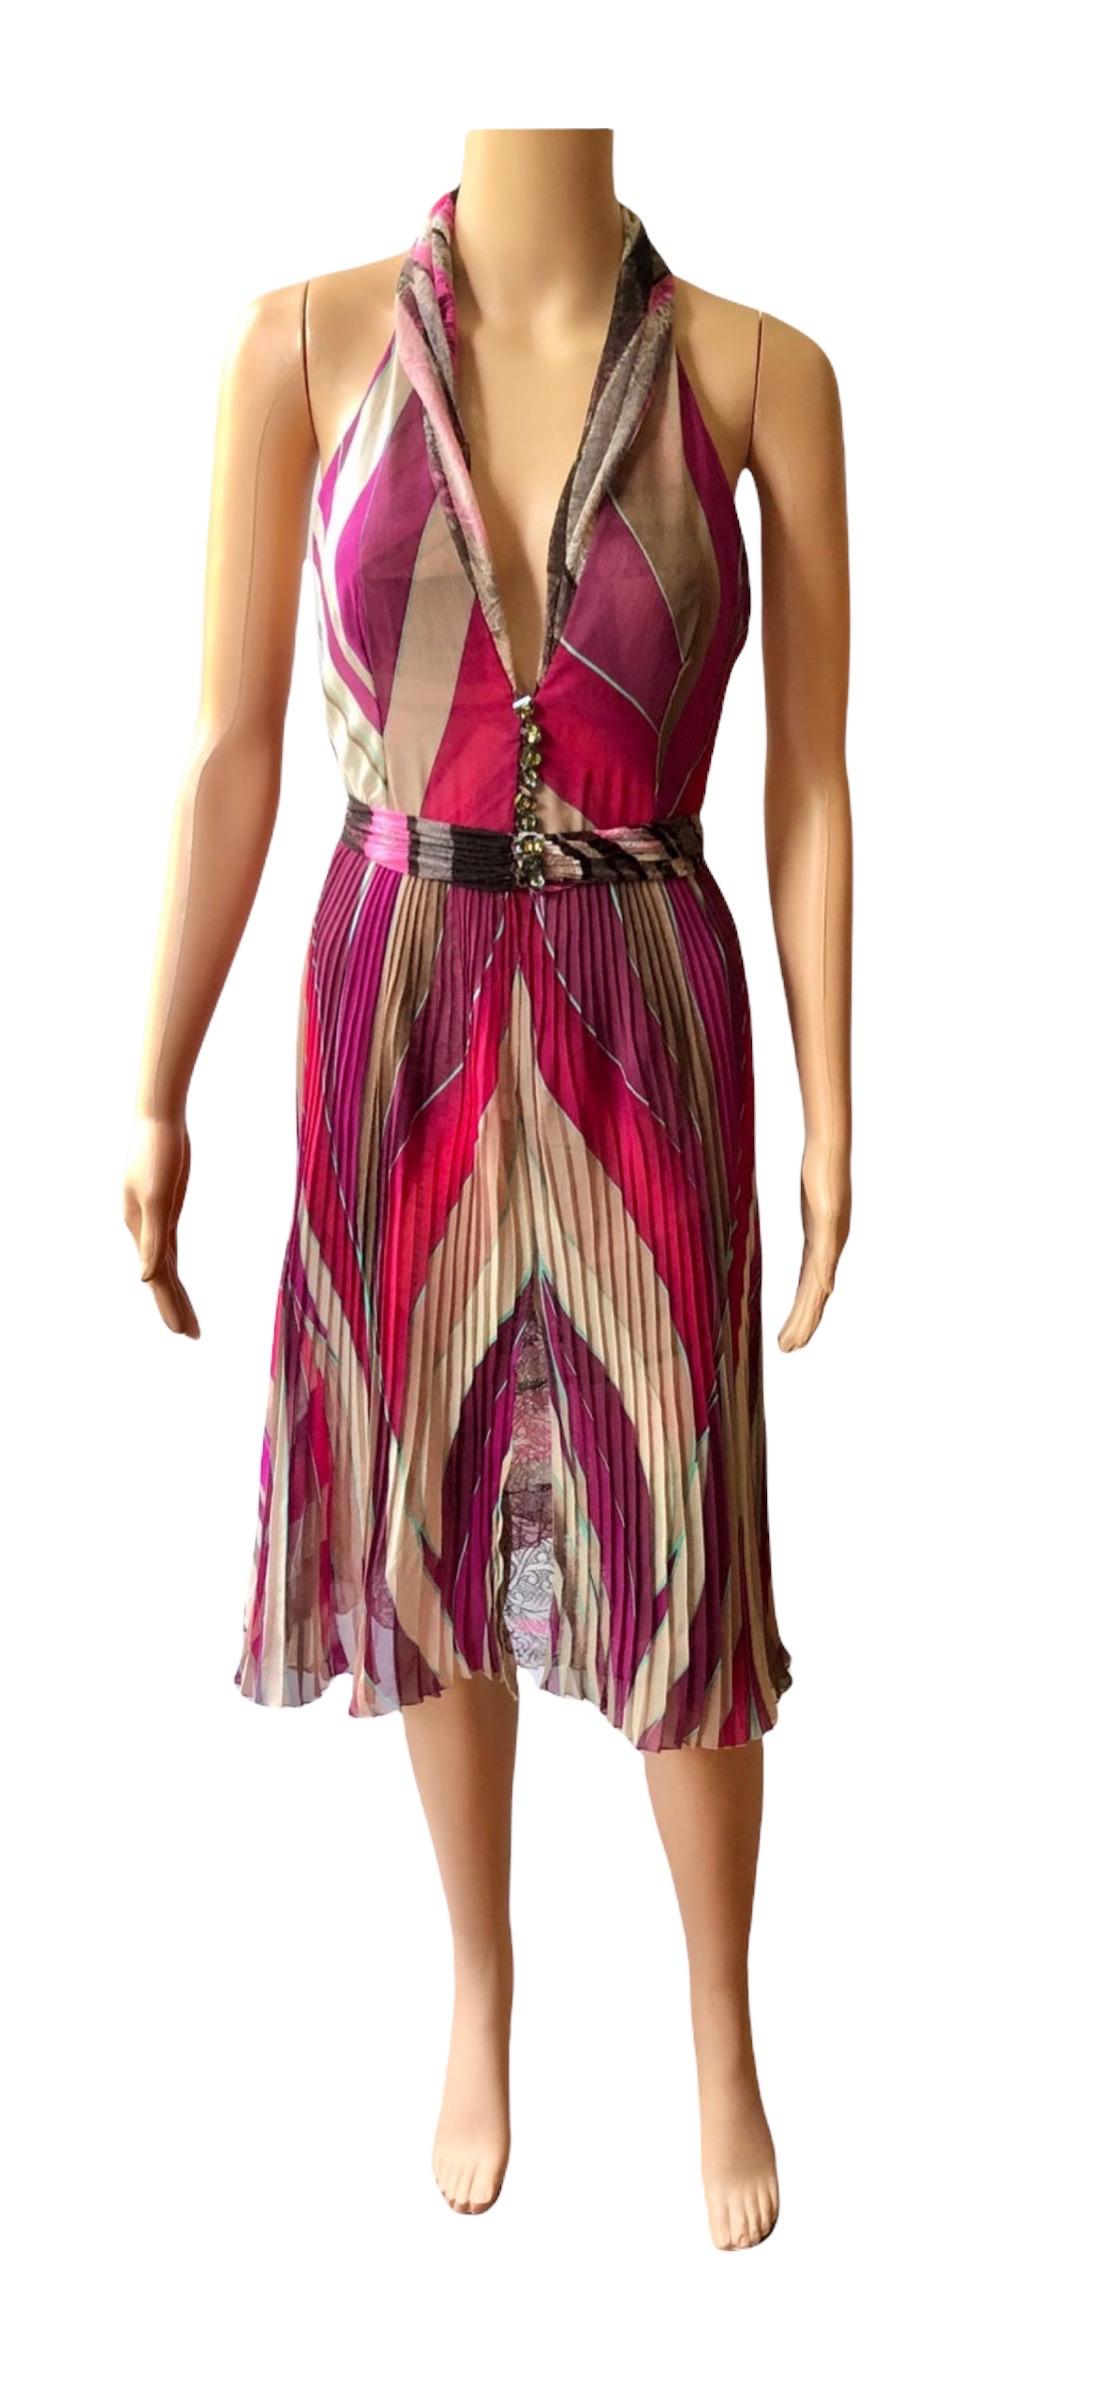 Gianni Versace F/W 2000 Runway Plunged Geometric Print Open Back Pleated Dress For Sale 2